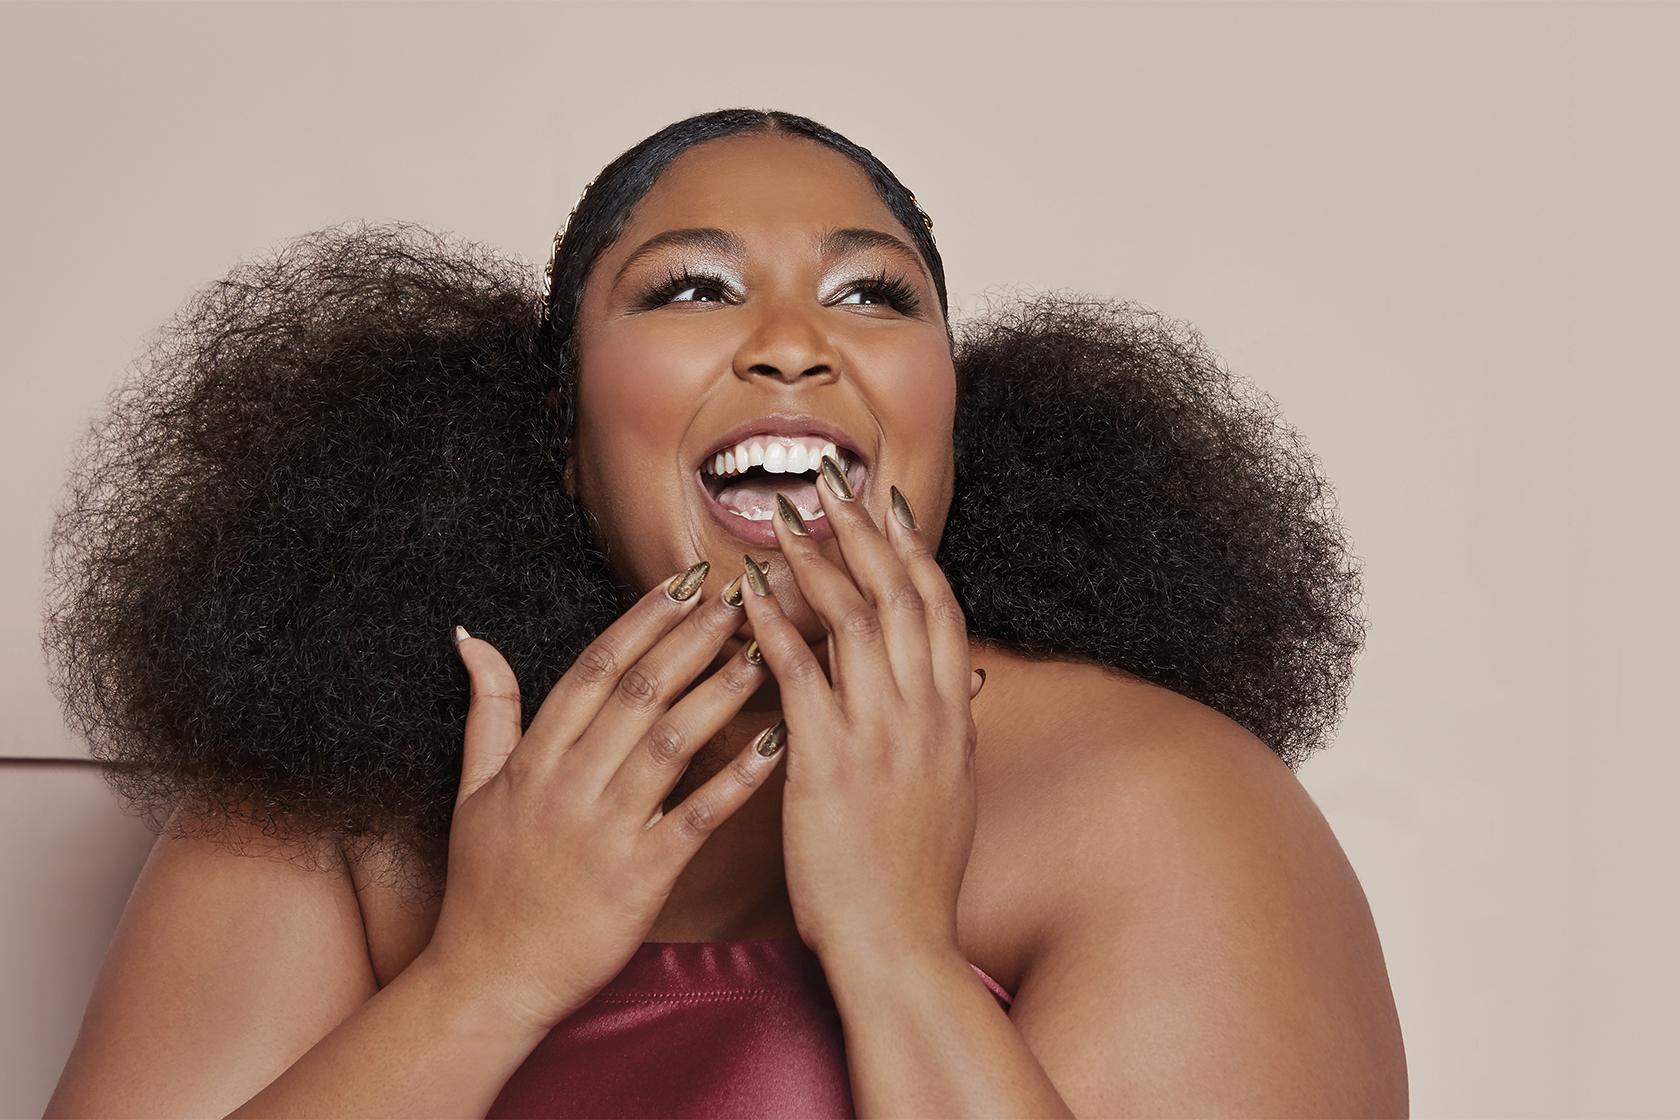 Lizzo may not be a 'villain' - but her female empowerment brand